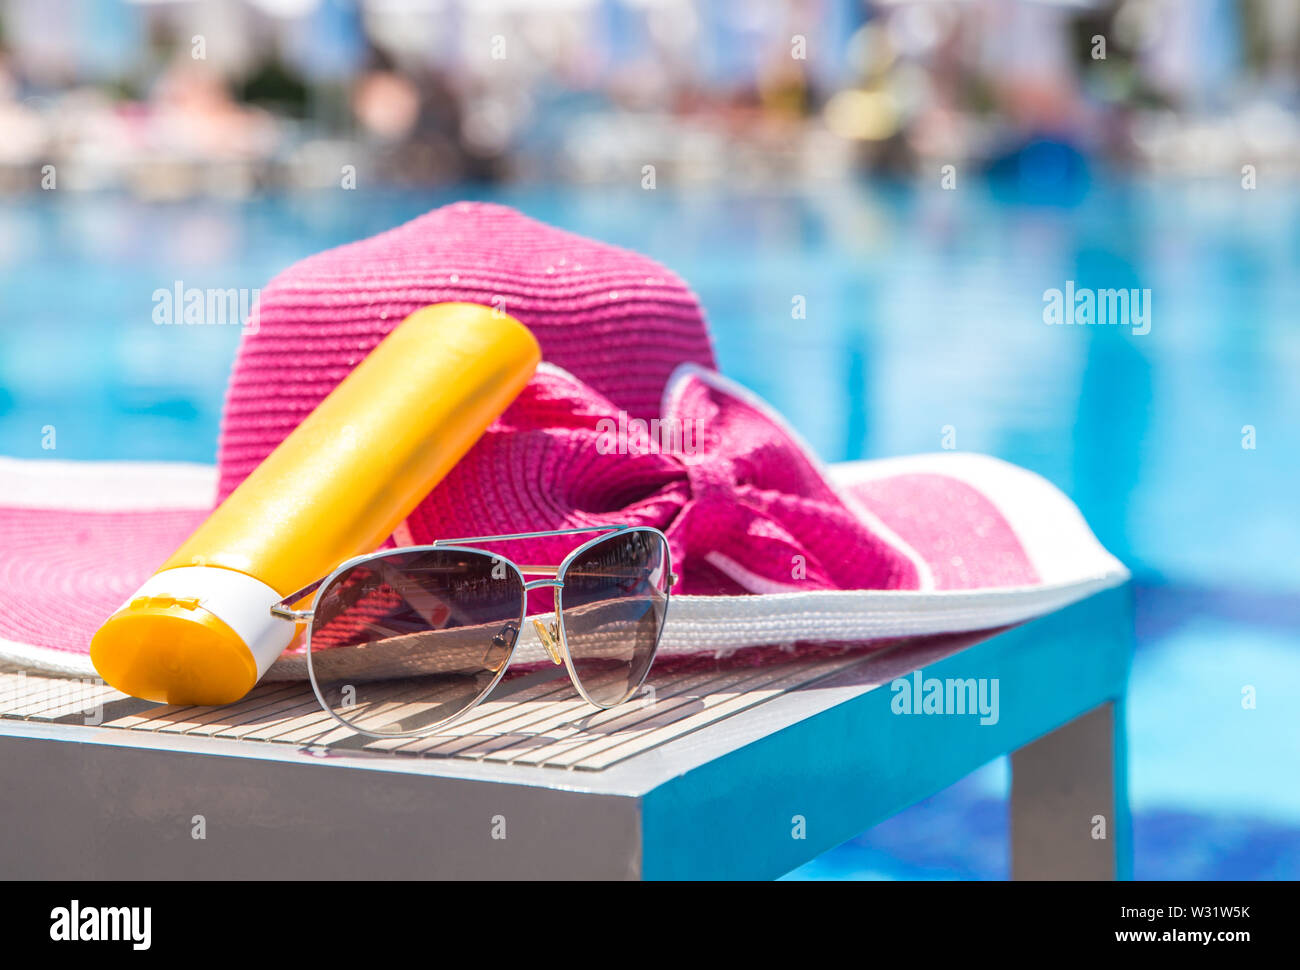 https://c8.alamy.com/comp/W31W5K/bottle-of-sunscreen-hat-and-sunglasses-next-to-swimming-pool-in-hotel-with-palms-on-background-W31W5K.jpg